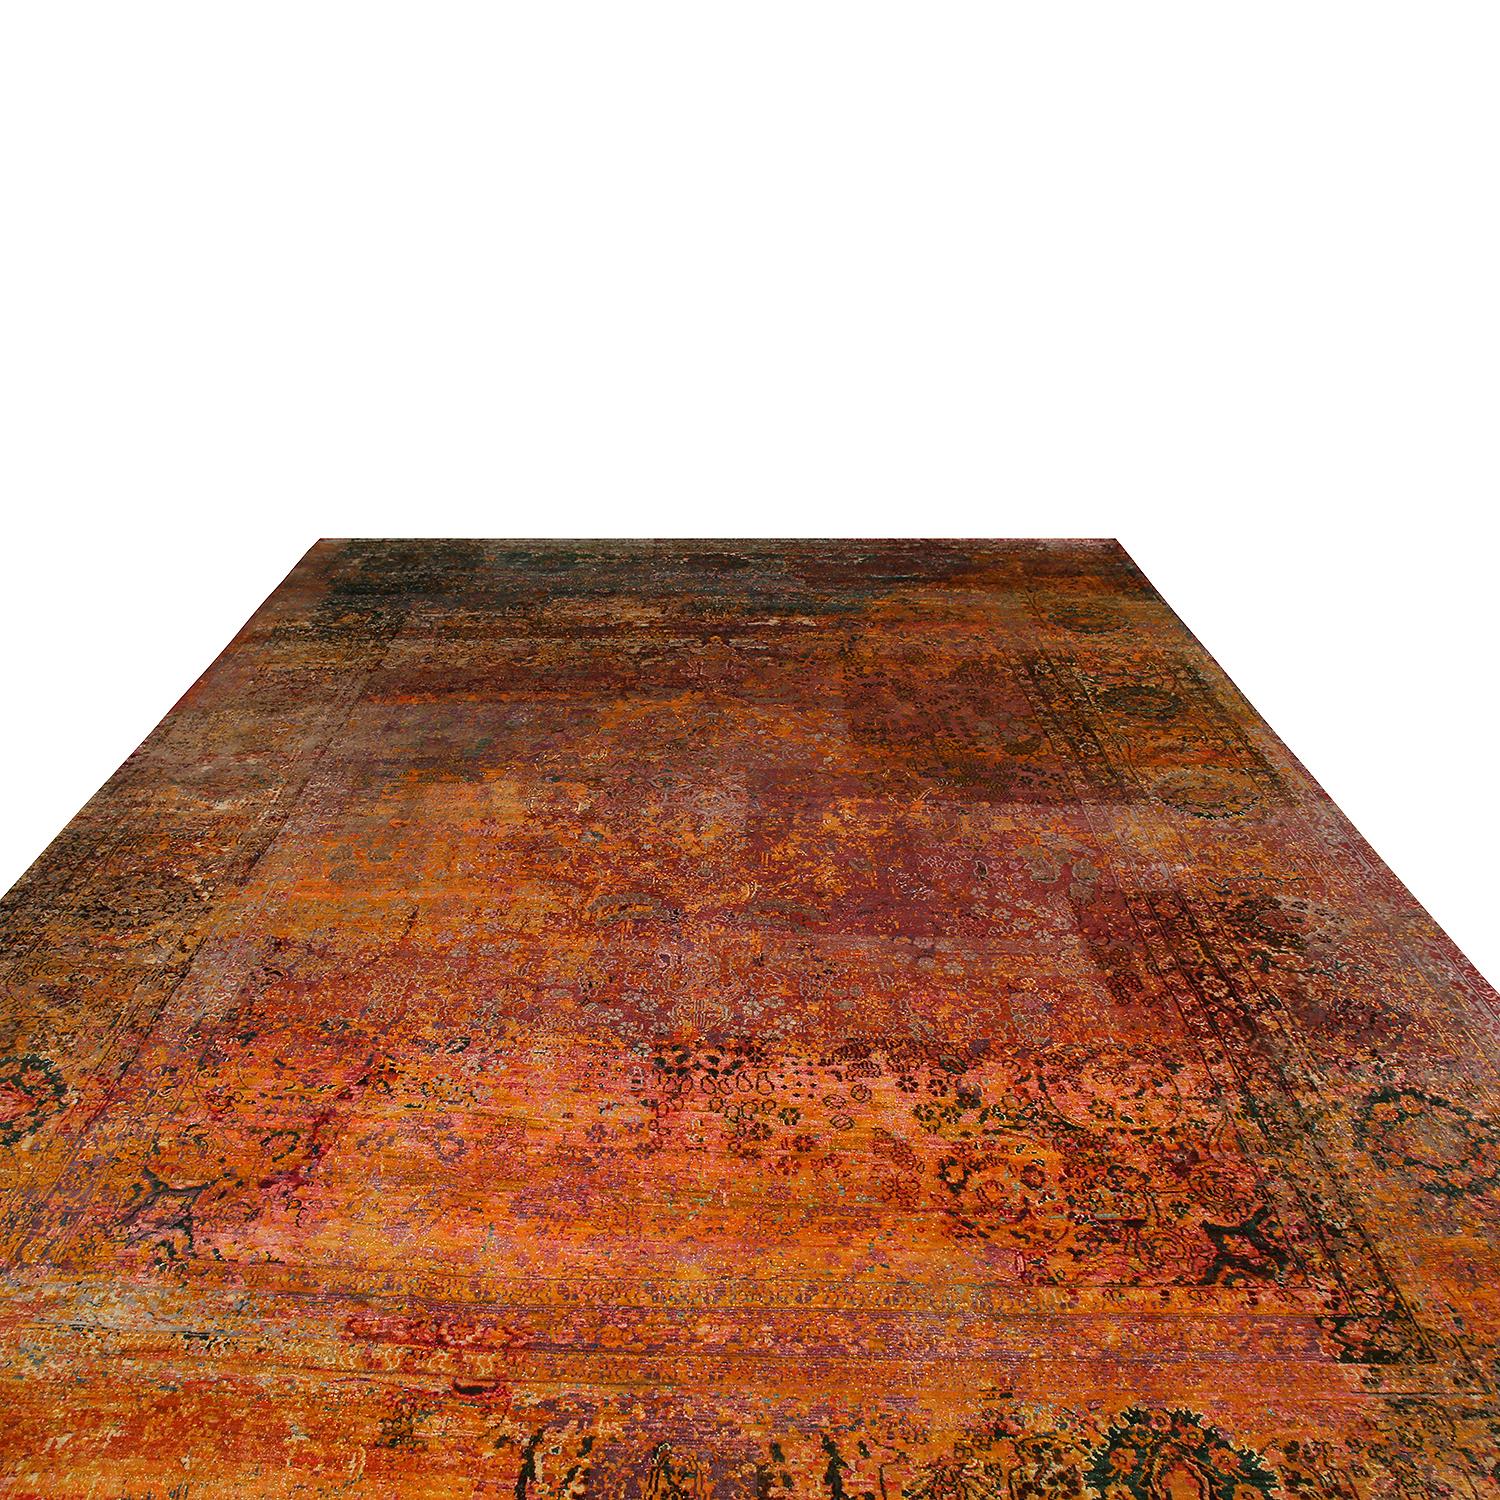 Hand knotted in high-quality luminous silk originating from India this contemporary rug enjoys a unique distressed aesthetic inspired by antique Agra masterpieces, marrying elements of each to achieve this blend of the pomegranate pink-red and gold